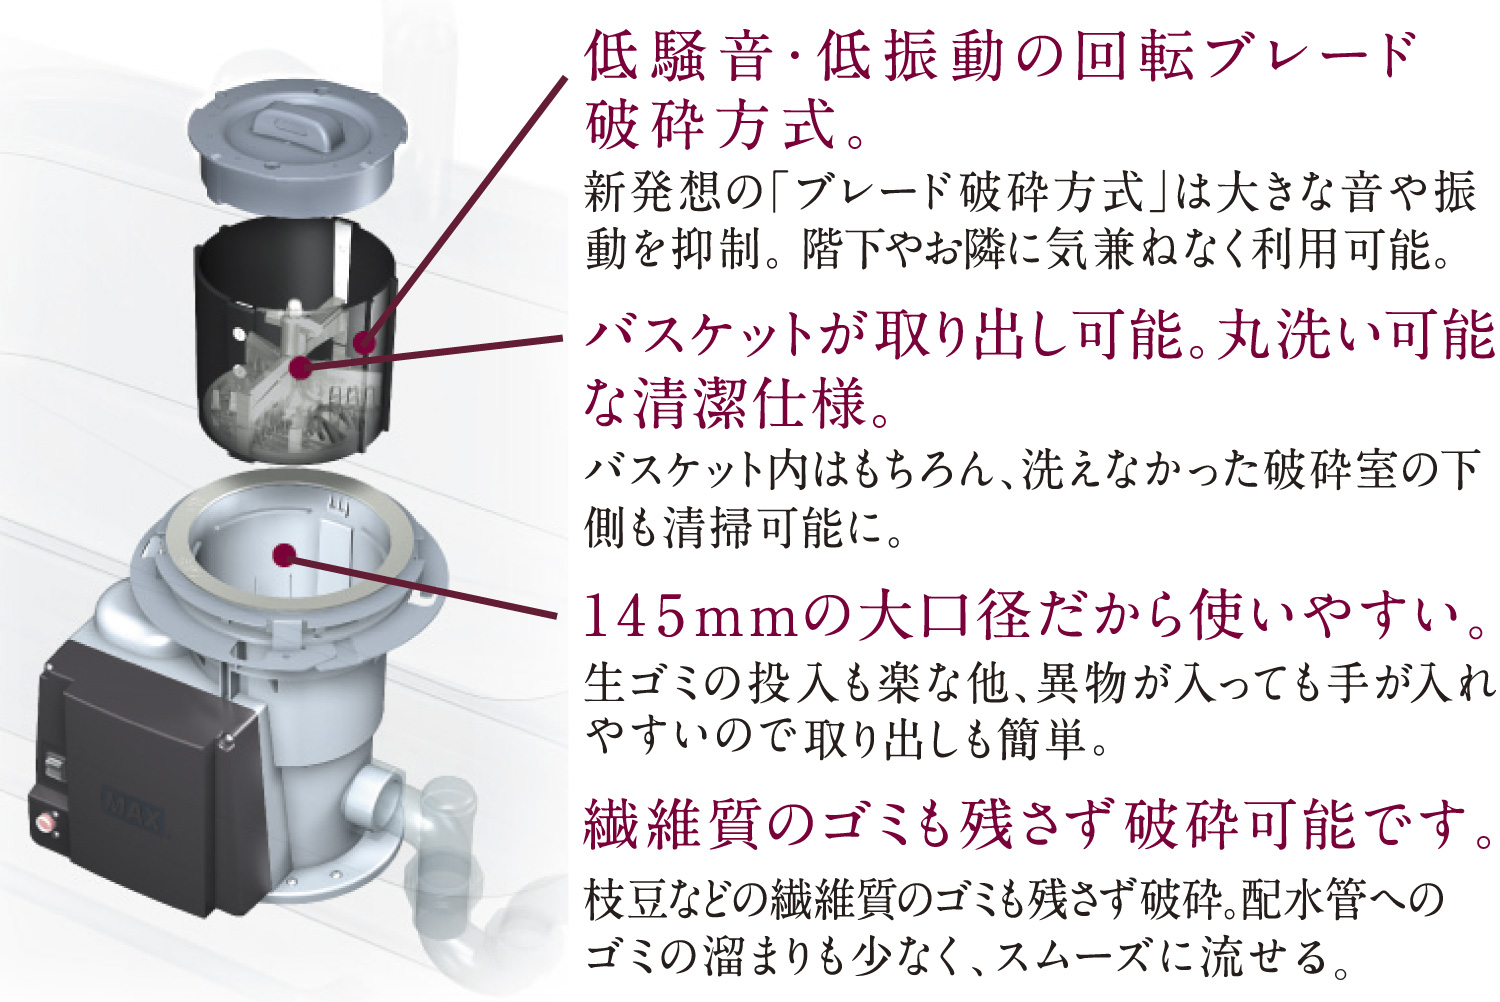 Other. Disposer. A grinder incorporated in the sink, Hygienically handle the garbage (conceptual diagram)